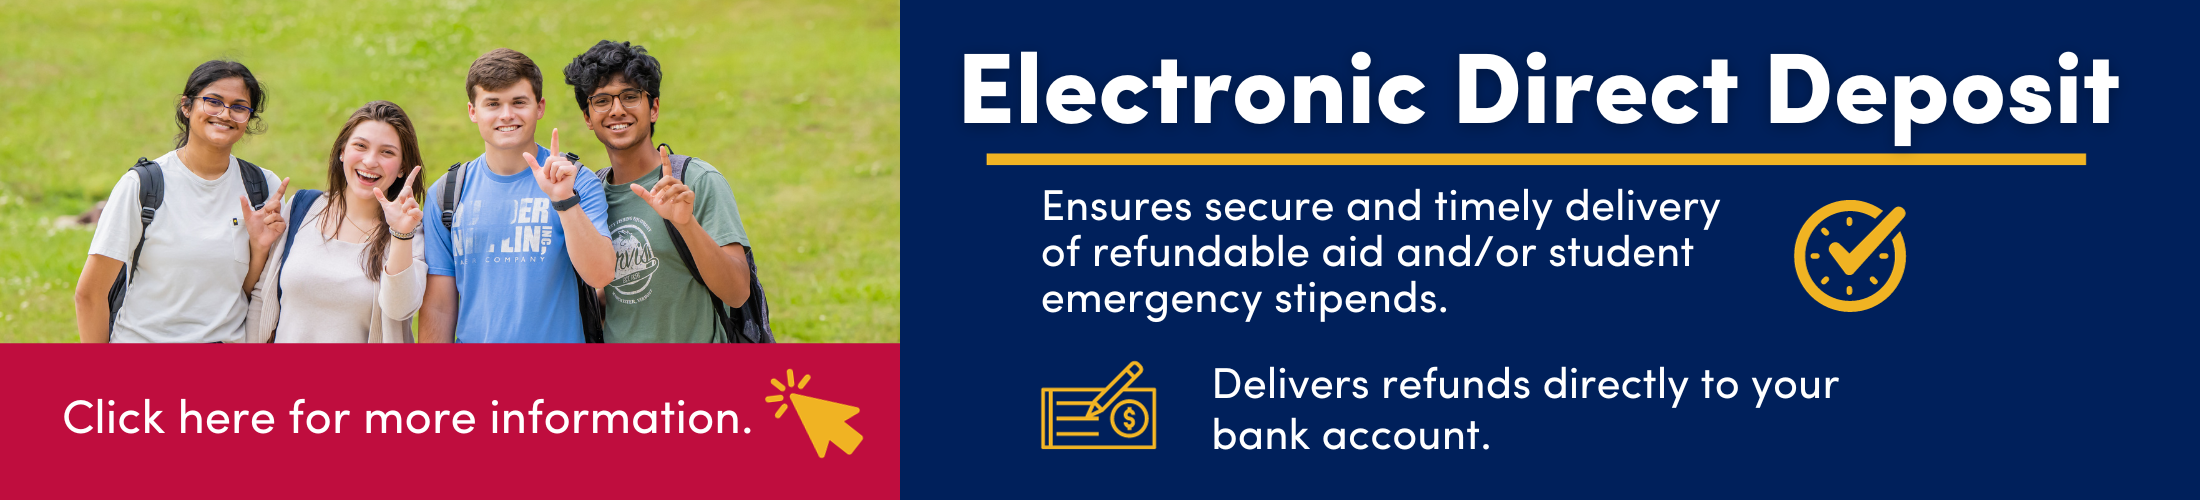 Electronic Direct Deposit - Ensures secure and timely delivery of refundable aid and/or student emergency stipends. Delivers refunds directly to your bank account.